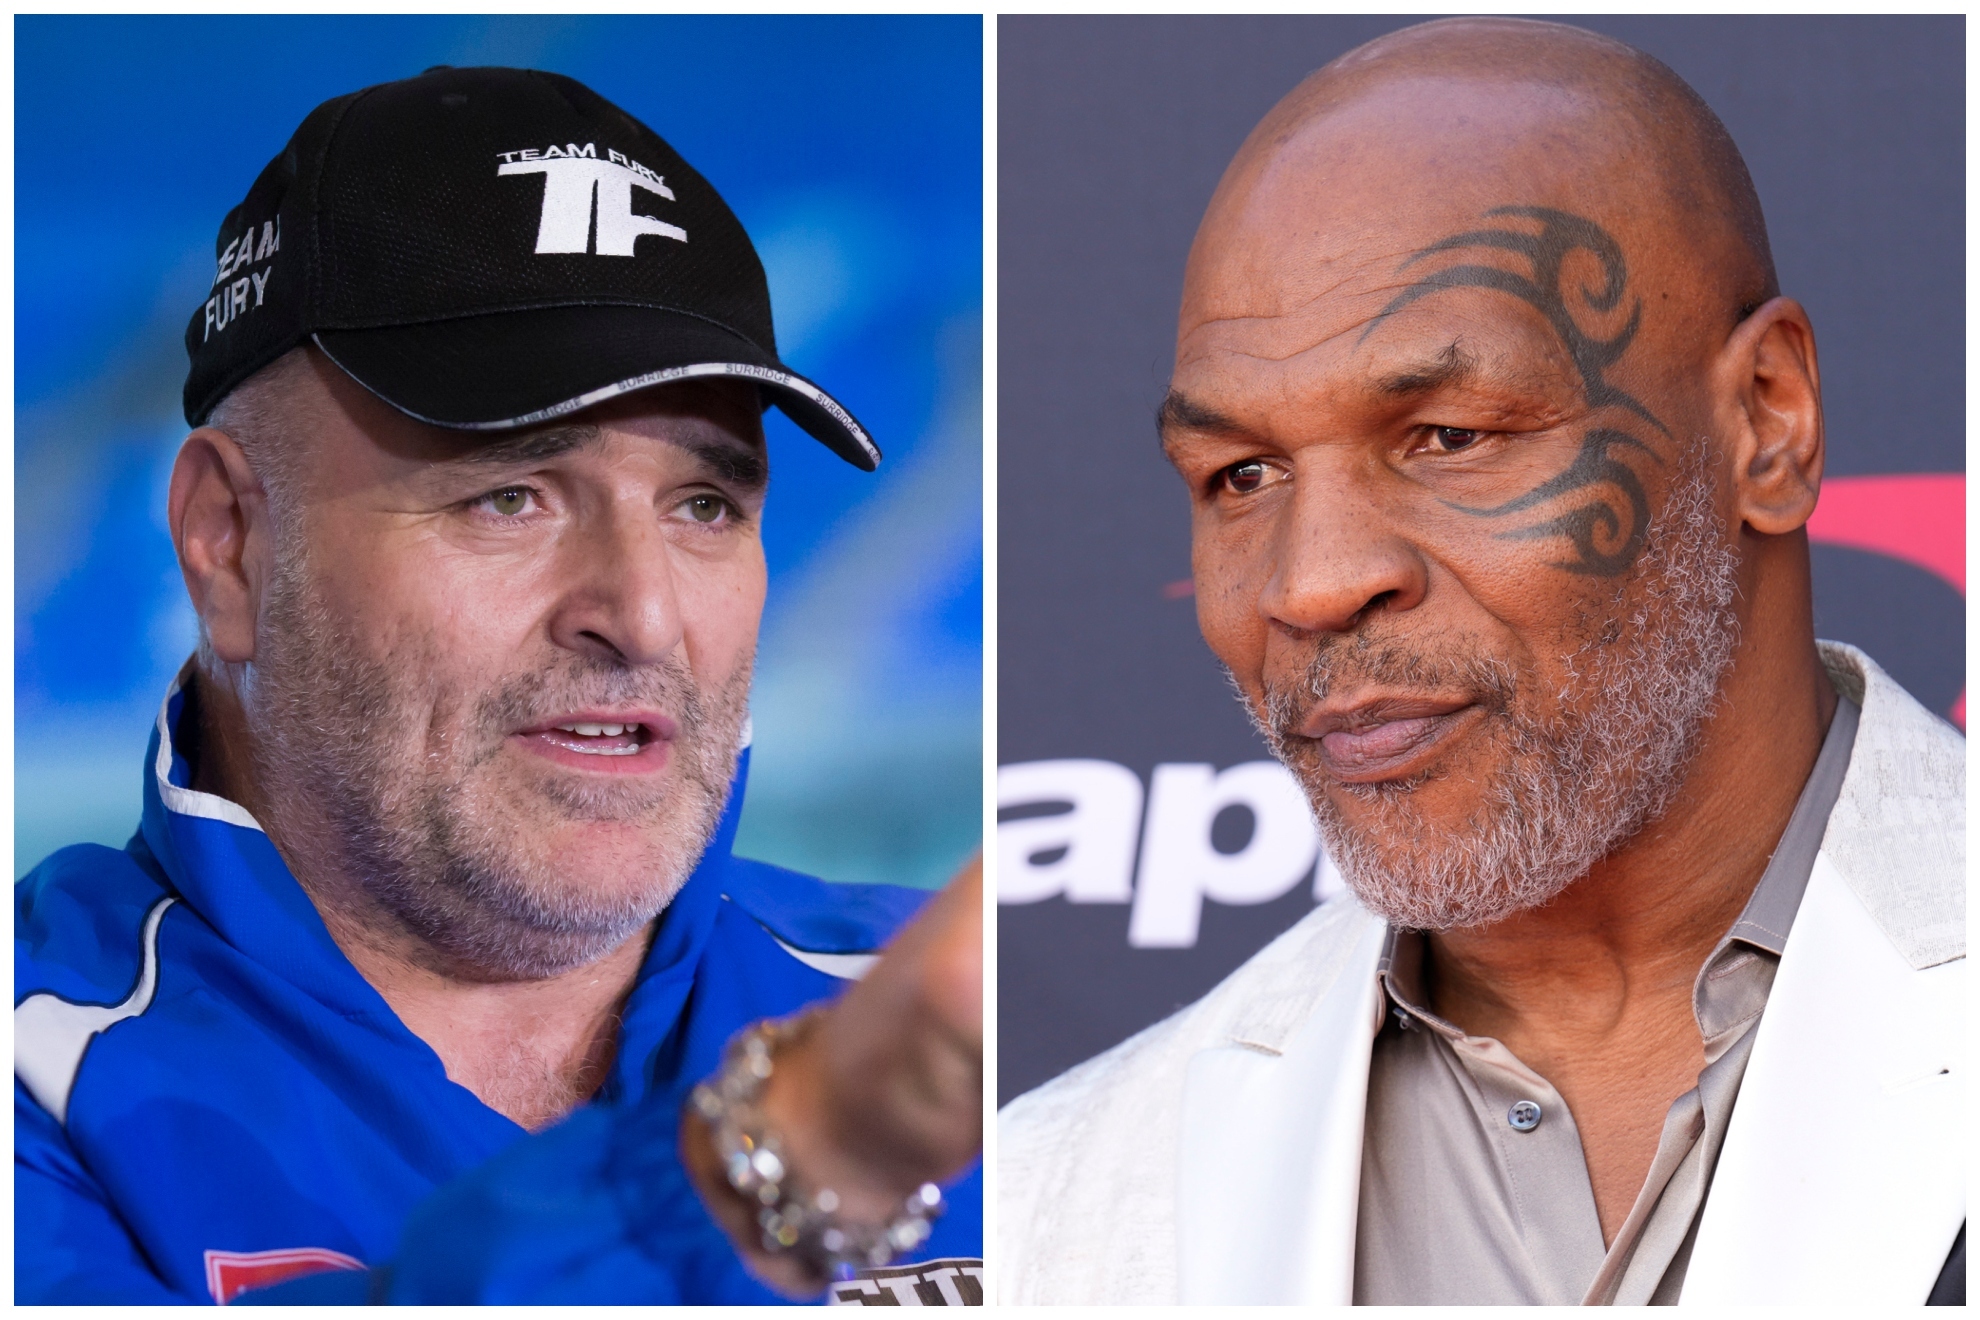 John Fury vs Mike Tyson: It could be an undercard fight before Tyson Fury vs Francis Ngannou